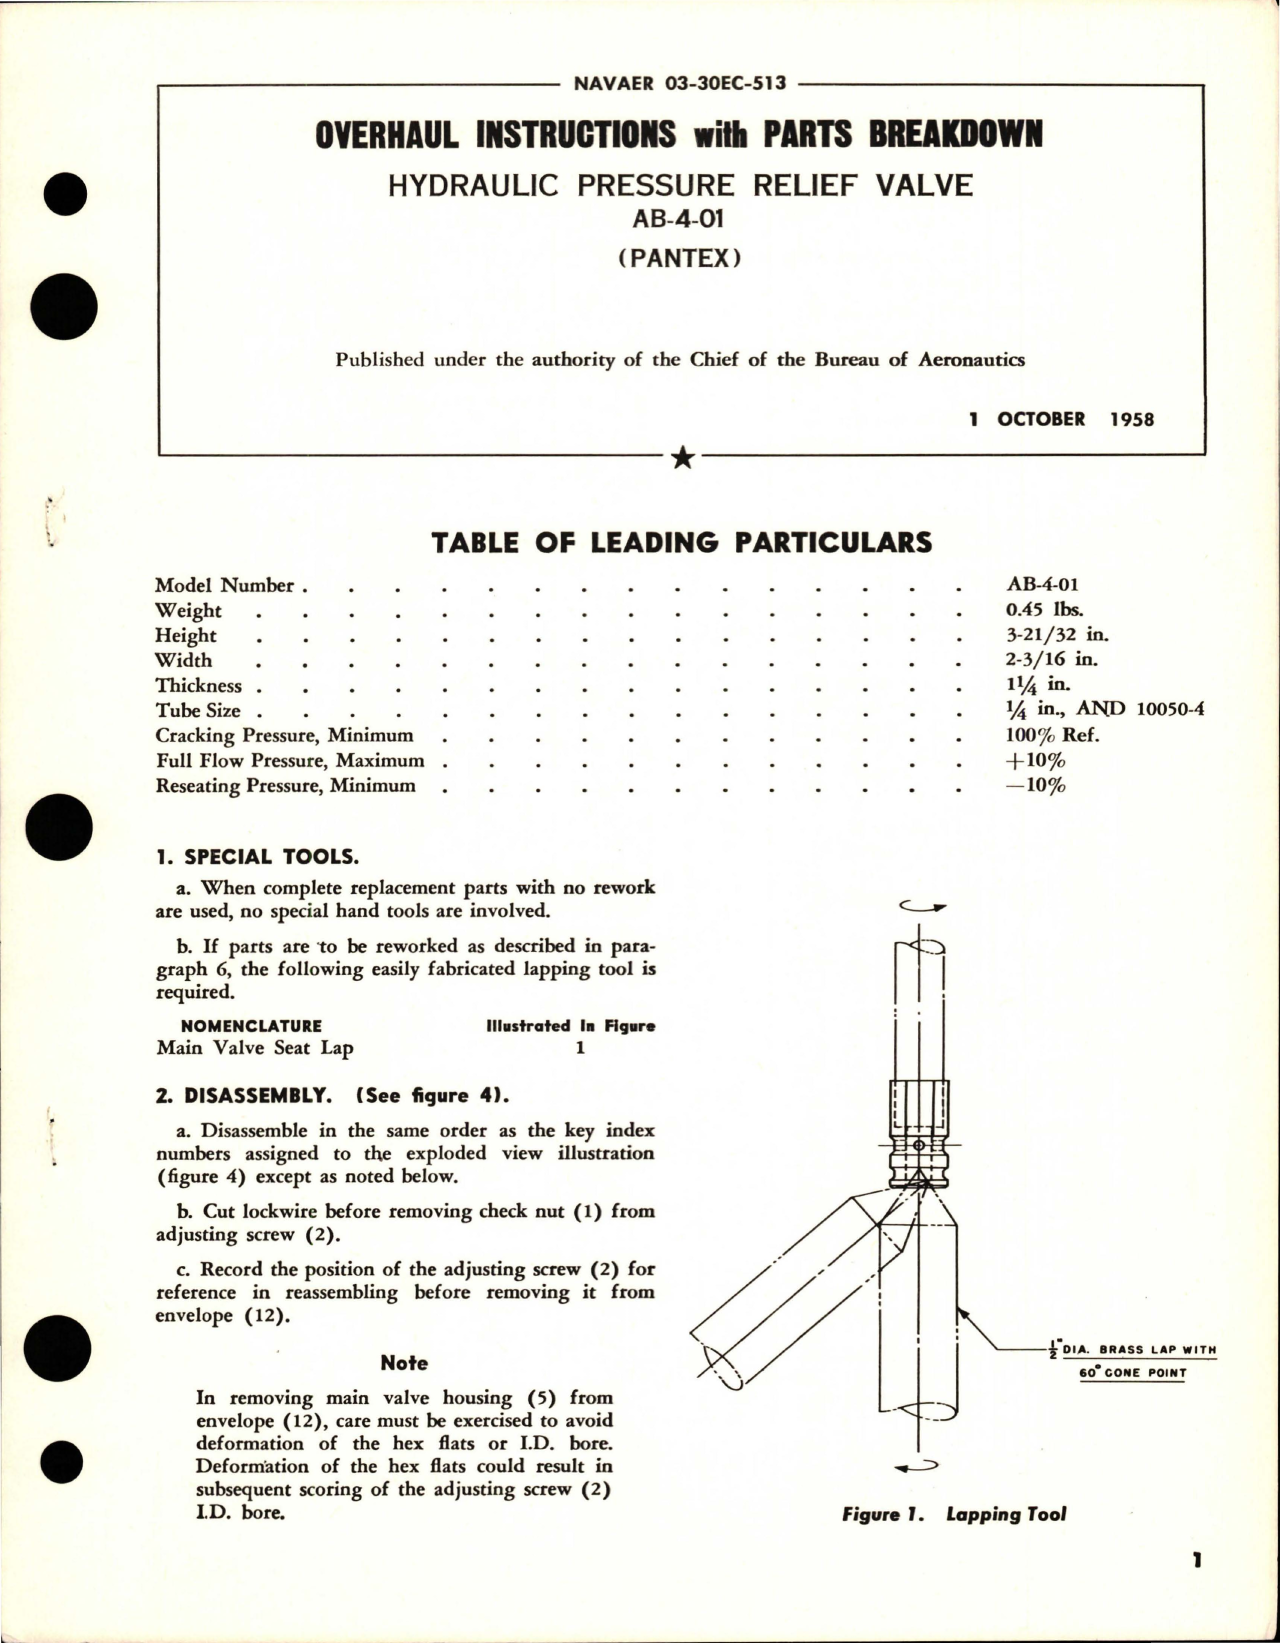 Sample page 1 from AirCorps Library document: Overhaul Instructions with Parts for Hydraulic Pressure Relief Valve - AB-4-01